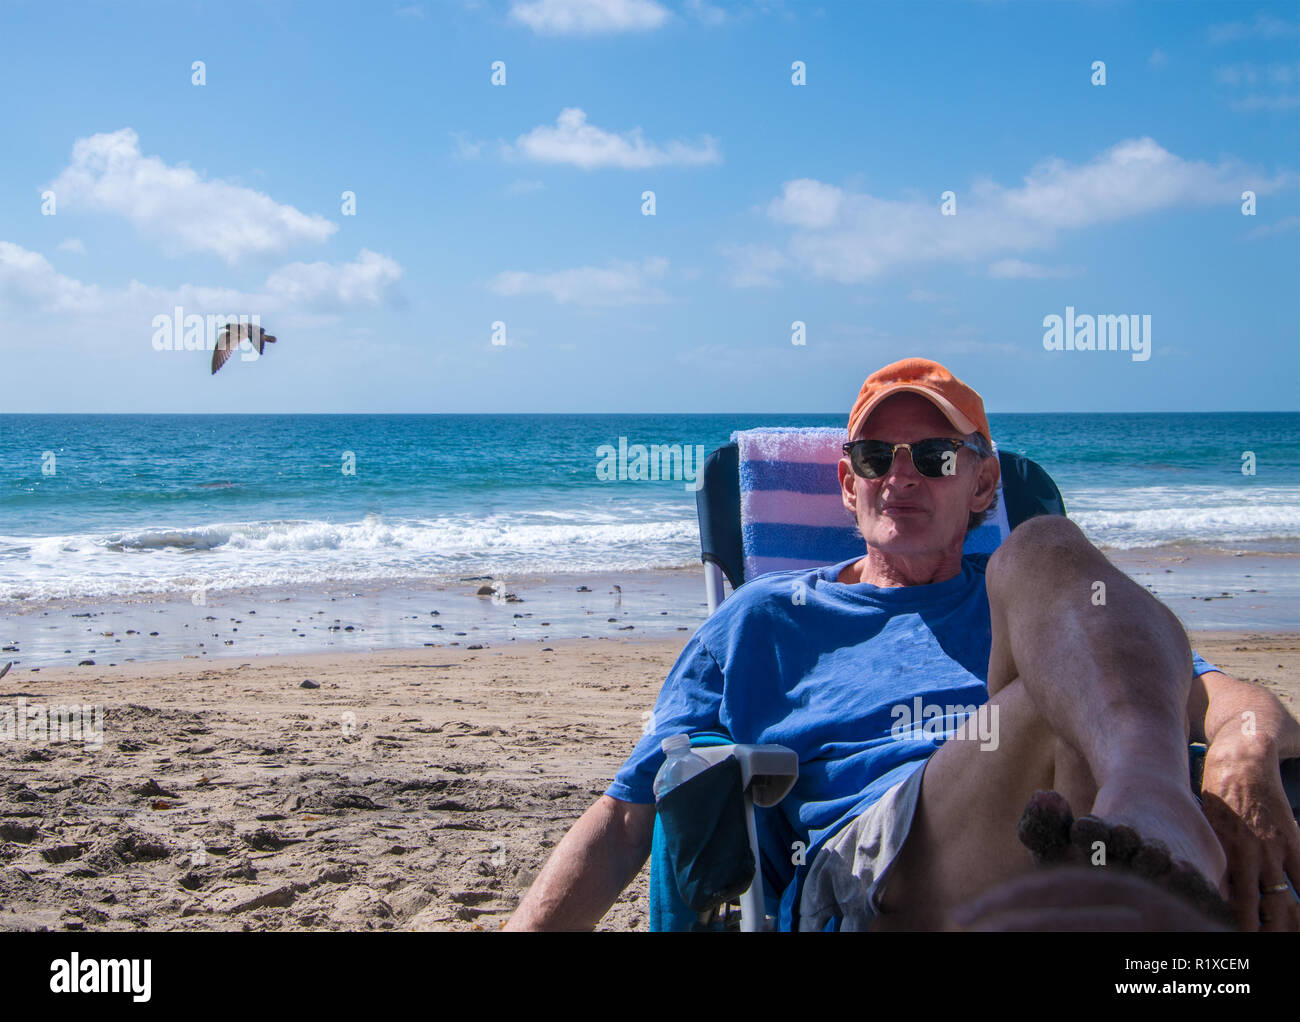 Handsome older baby boomer man wearing an orange cap sitting on beach chair by the ocean with a serious look on his face Stock Photo